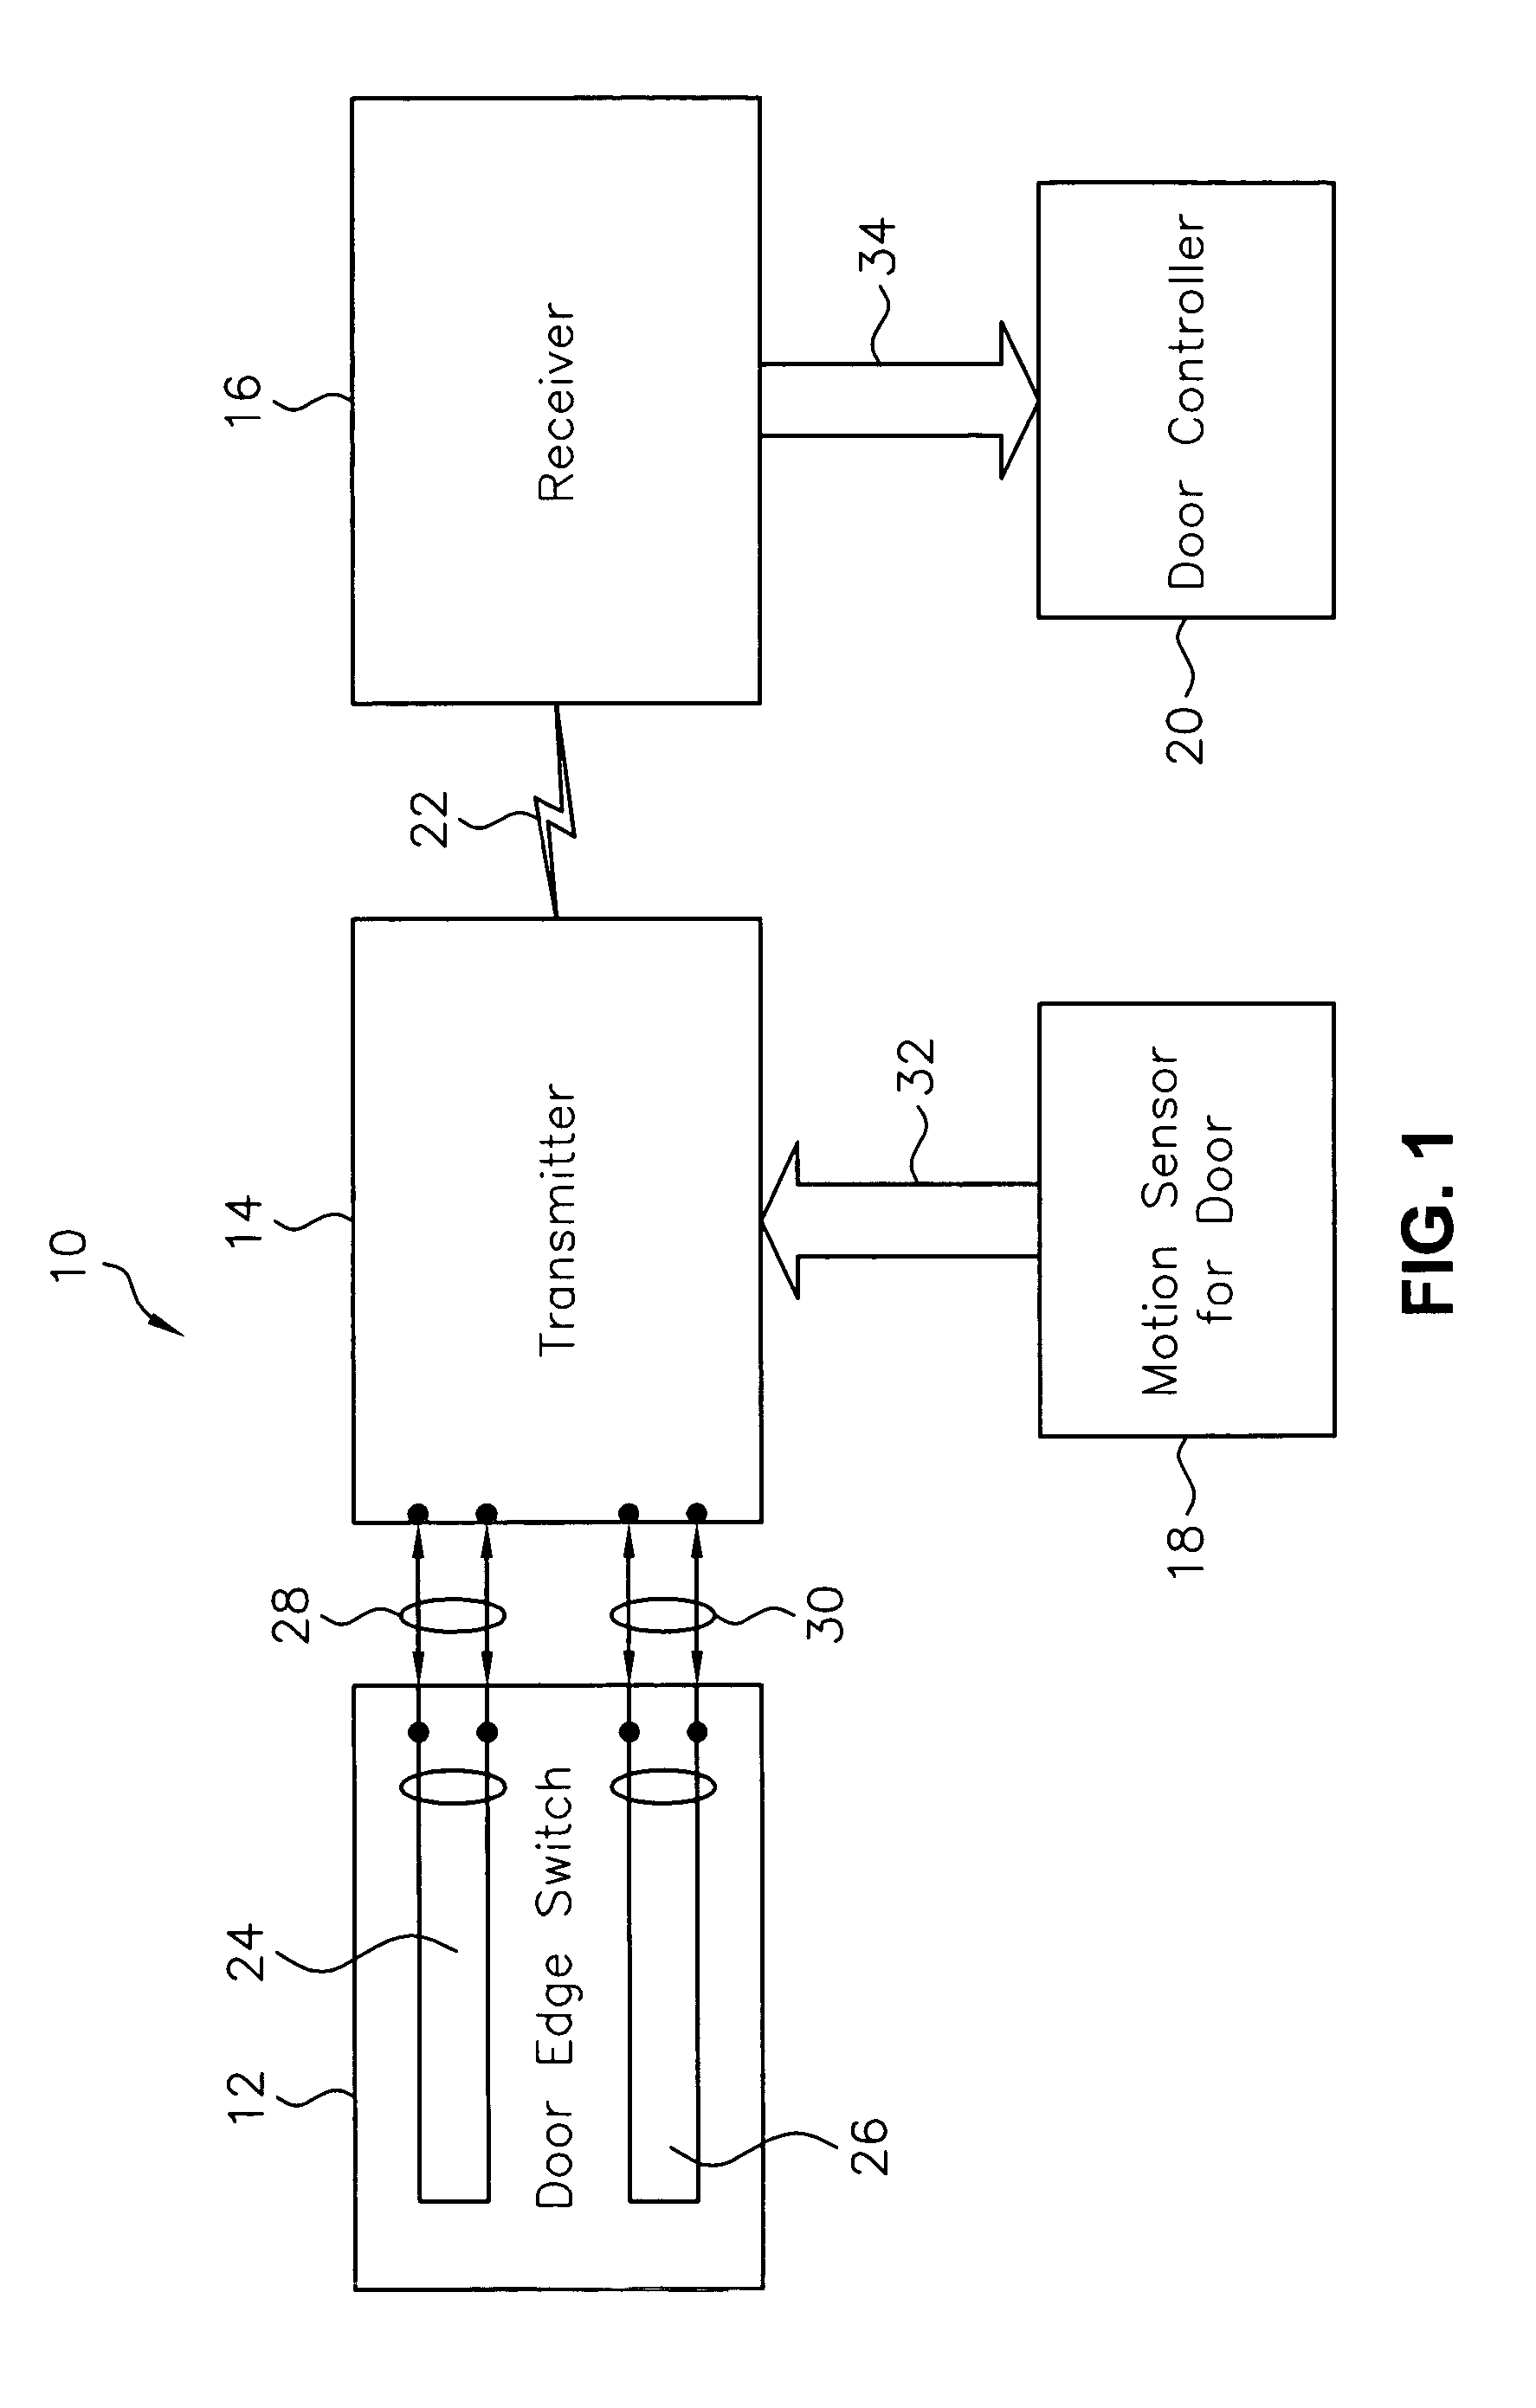 Monitored transmitter and receiver system and method for safety devices